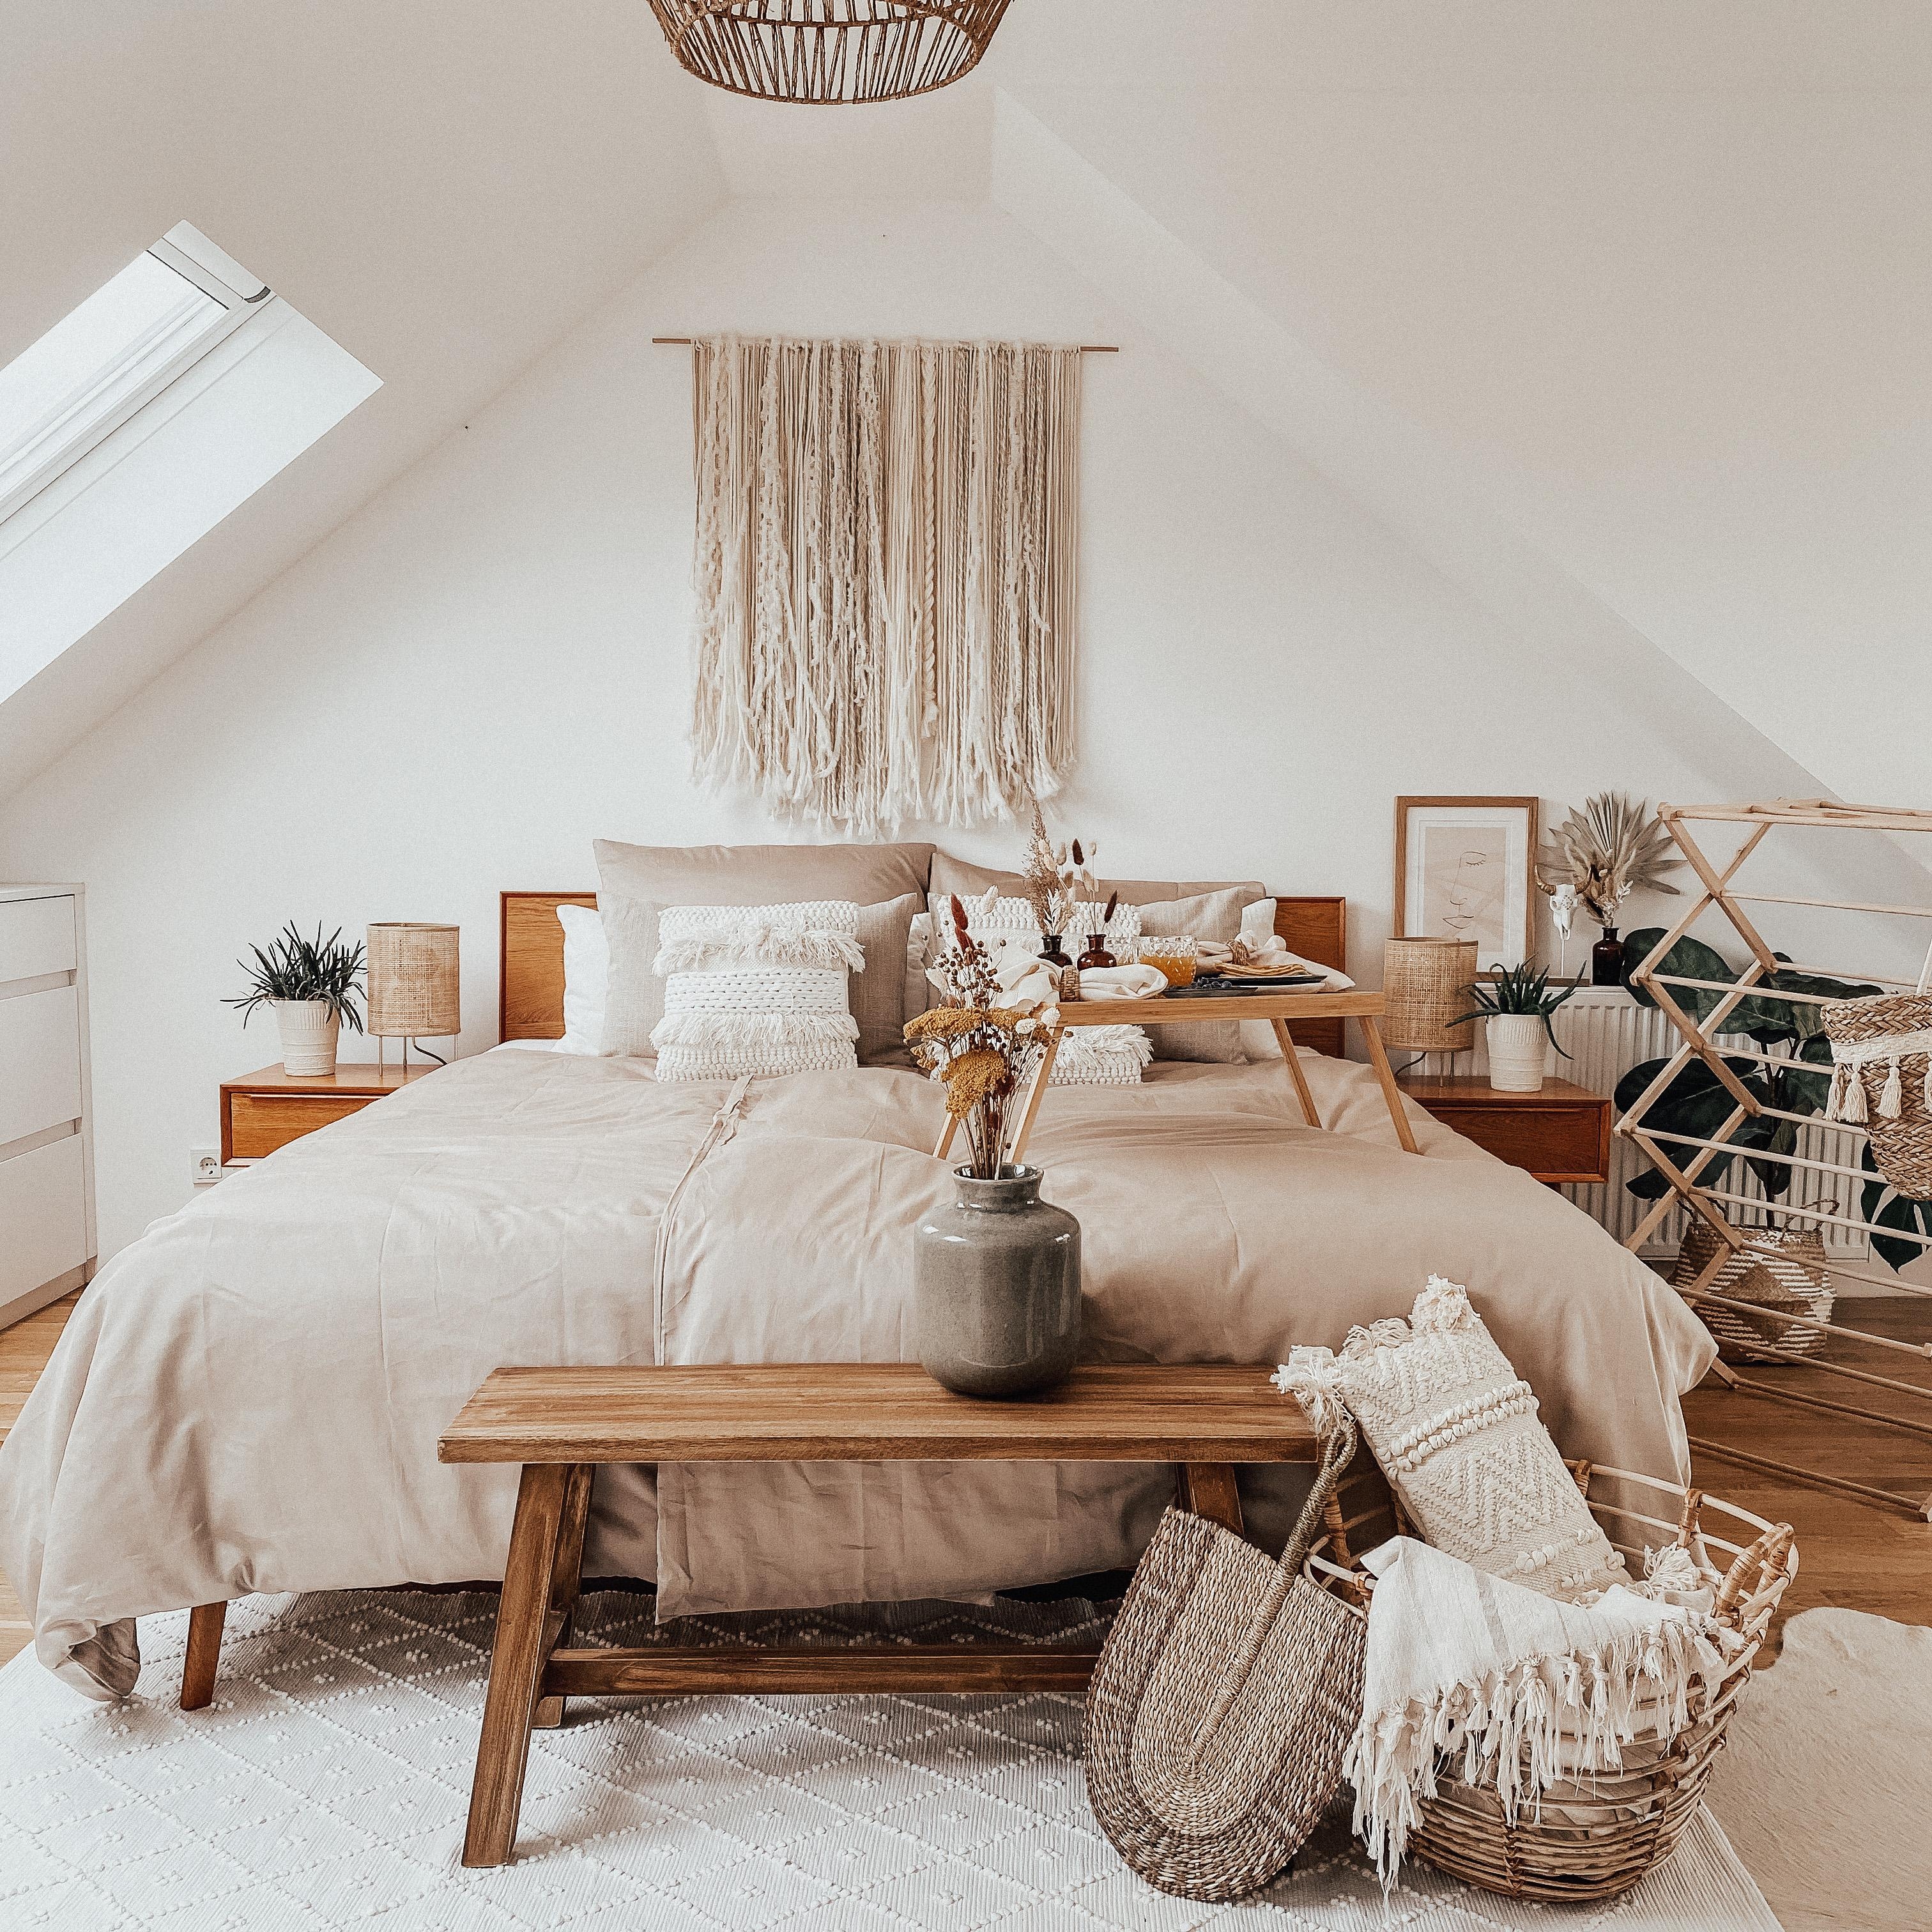 Happy Monday
#bedroom #schlafzimmer #bett #bohovibes #bohostyle #bohohome #natural #cozyhome #couchliebt